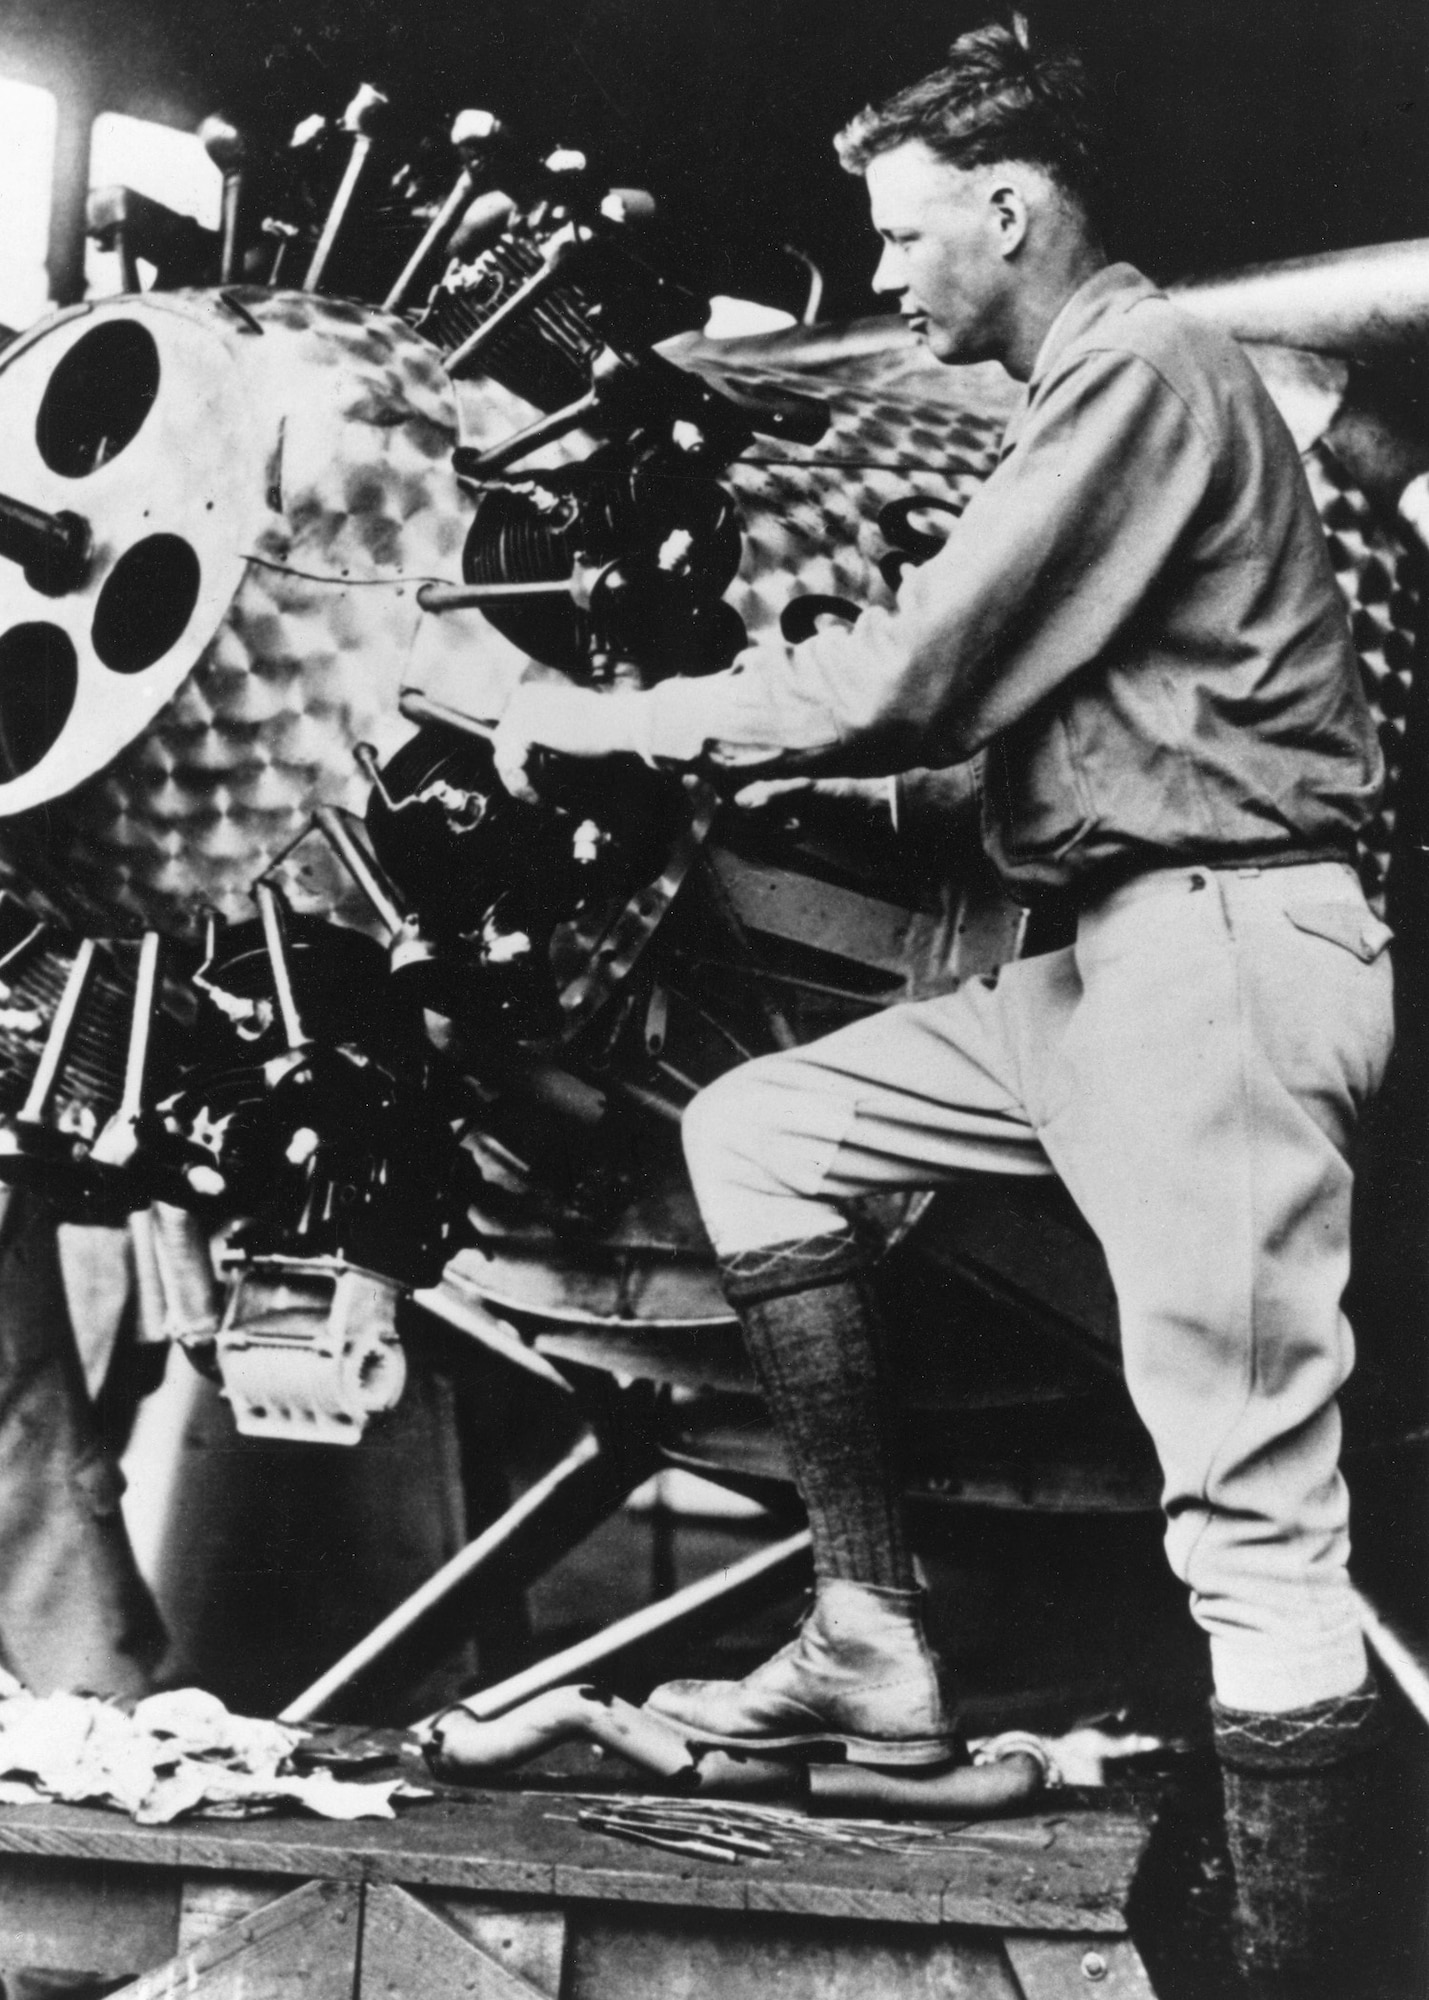 Capt. Charles A. Lindbergh performs maintenance on the Spirit of St. Louis. Lindbergh flew the aircraft in a transatlantic flight from in 1927, completing the first nonstop flight between New York to Paris. Lindbergh’s military service included being a member of the Missouri National Guard’s 110th Observation Squadron, which today is the 110th Bomb Squadron at Whiteman Air Force Base, Missouri, and is known as “Lindbergh’s Own.” (131st Bomb Wing archive photo)